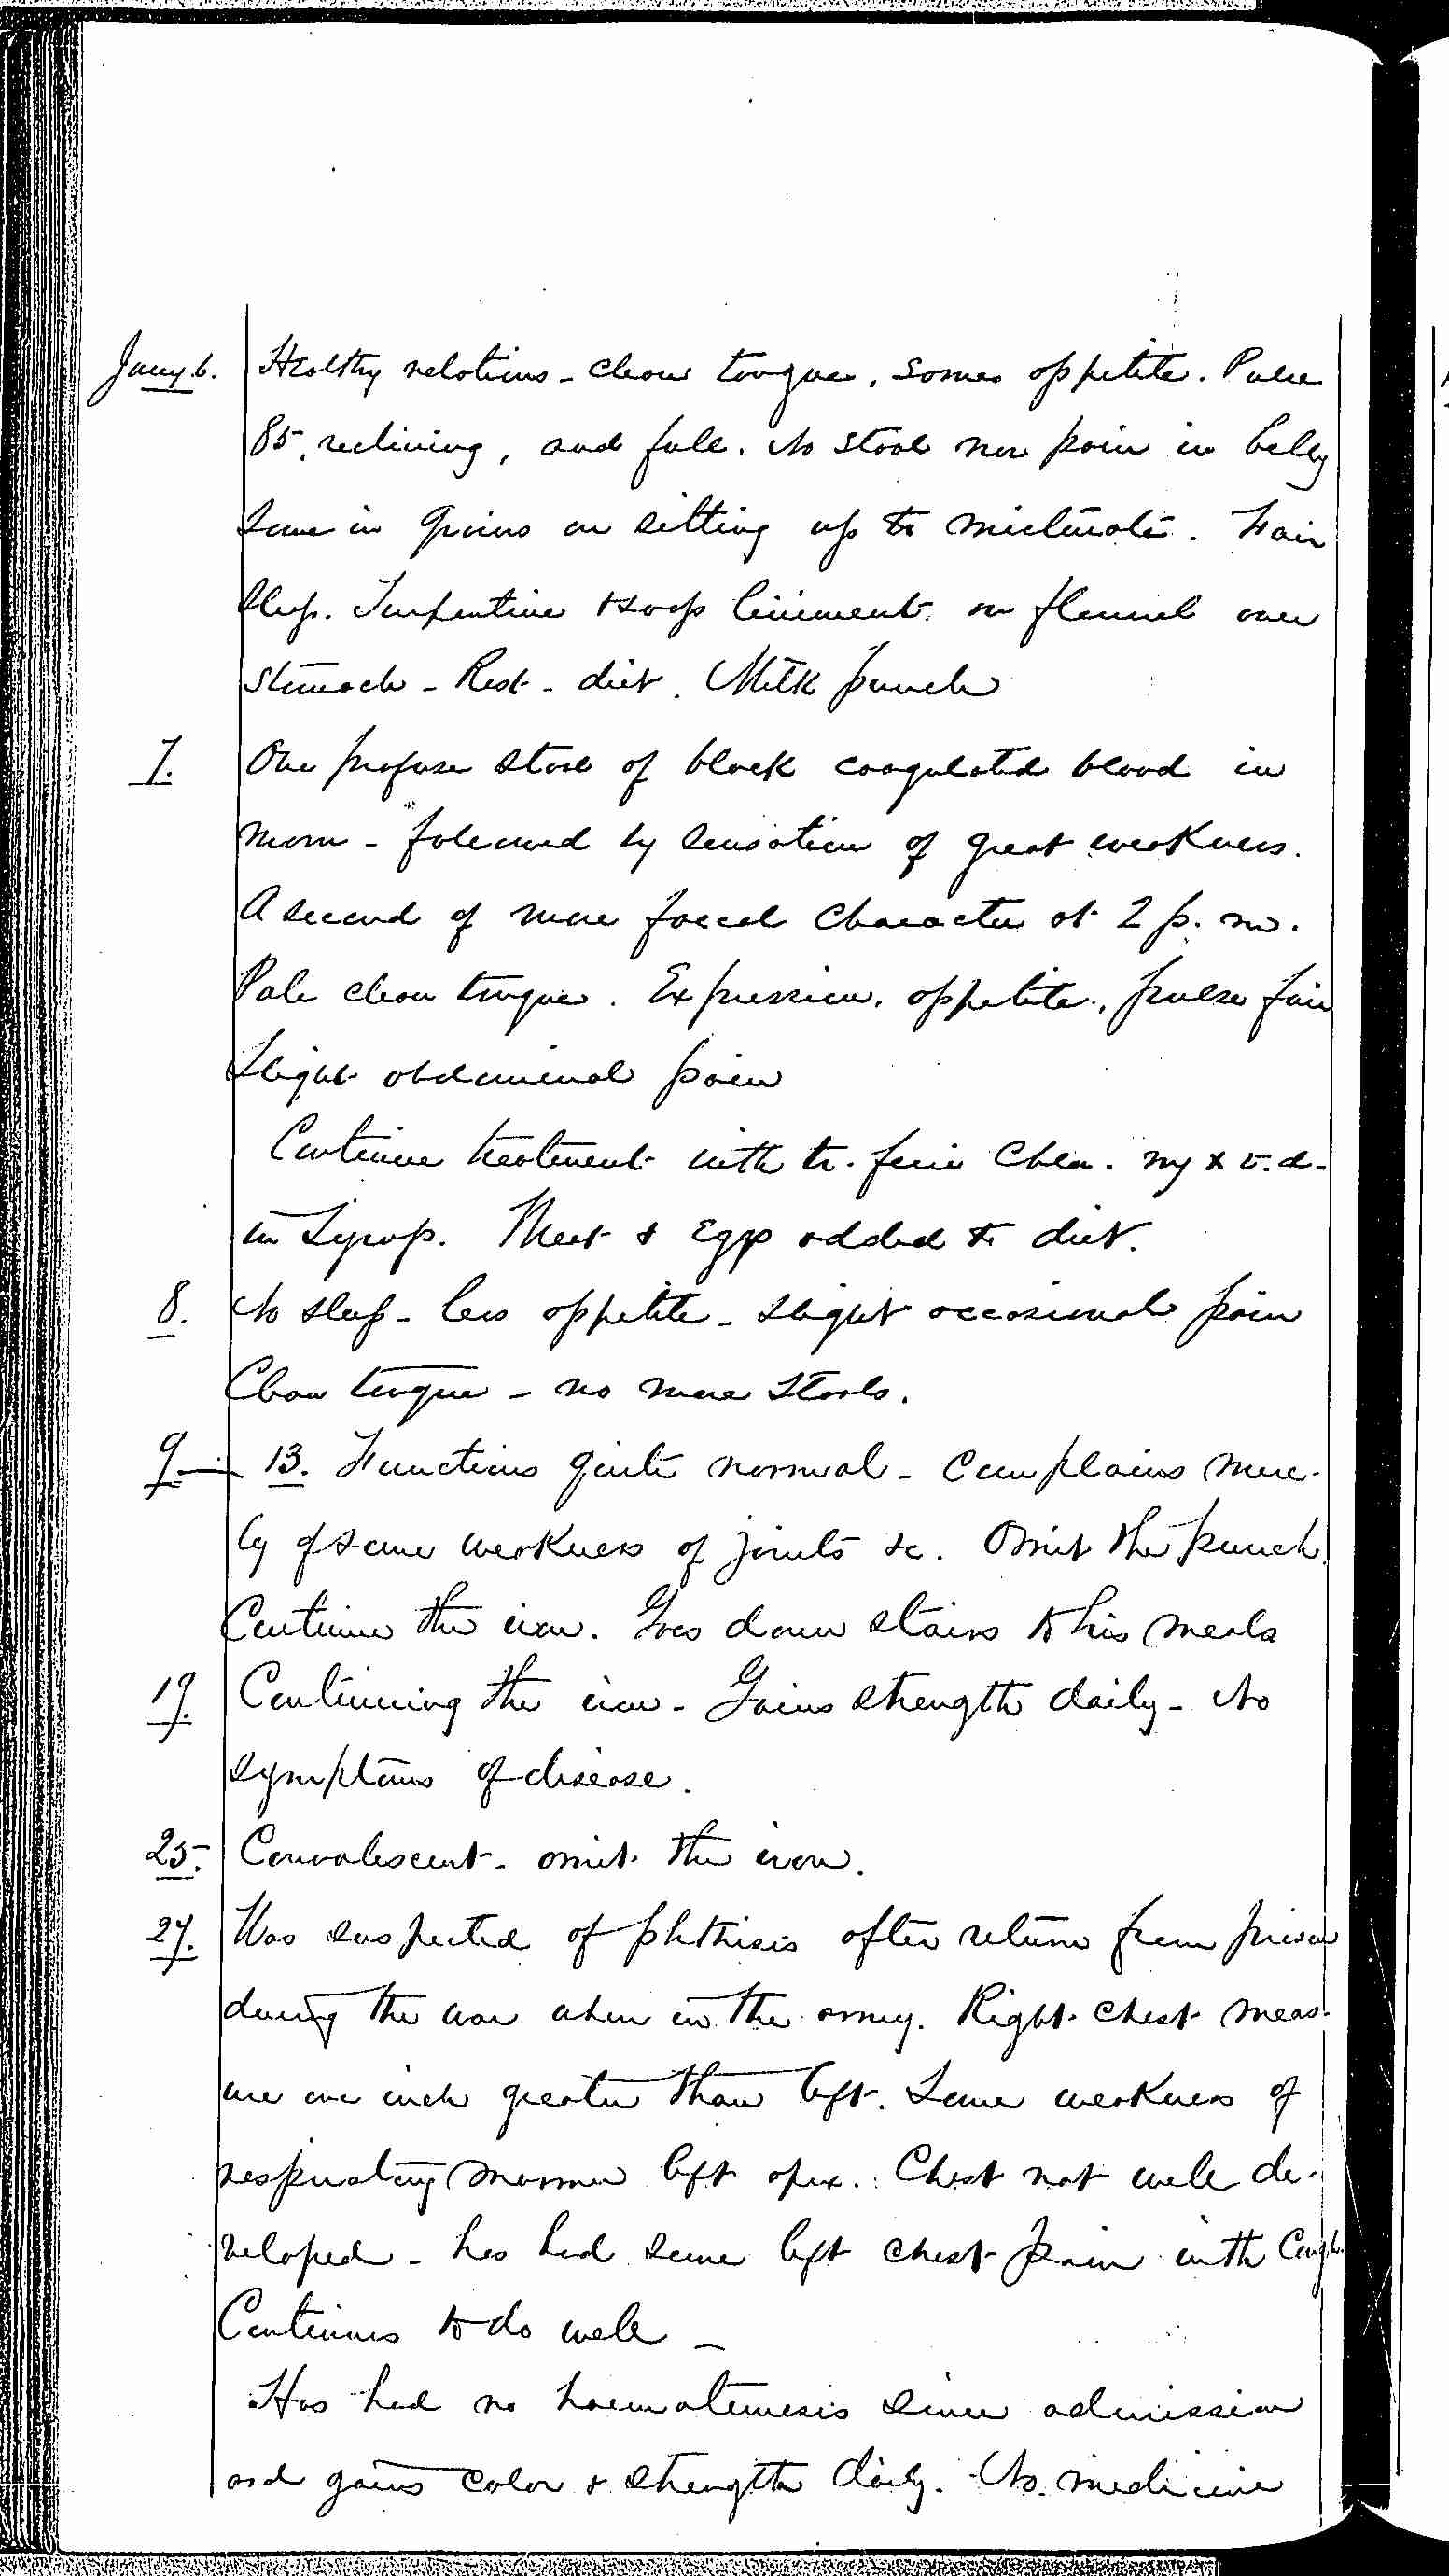 Entry for Michael Birney (page 2 of 3) in the log Hospital Tickets and Case Papers - Naval Hospital - Washington, D.C. - 1868-69